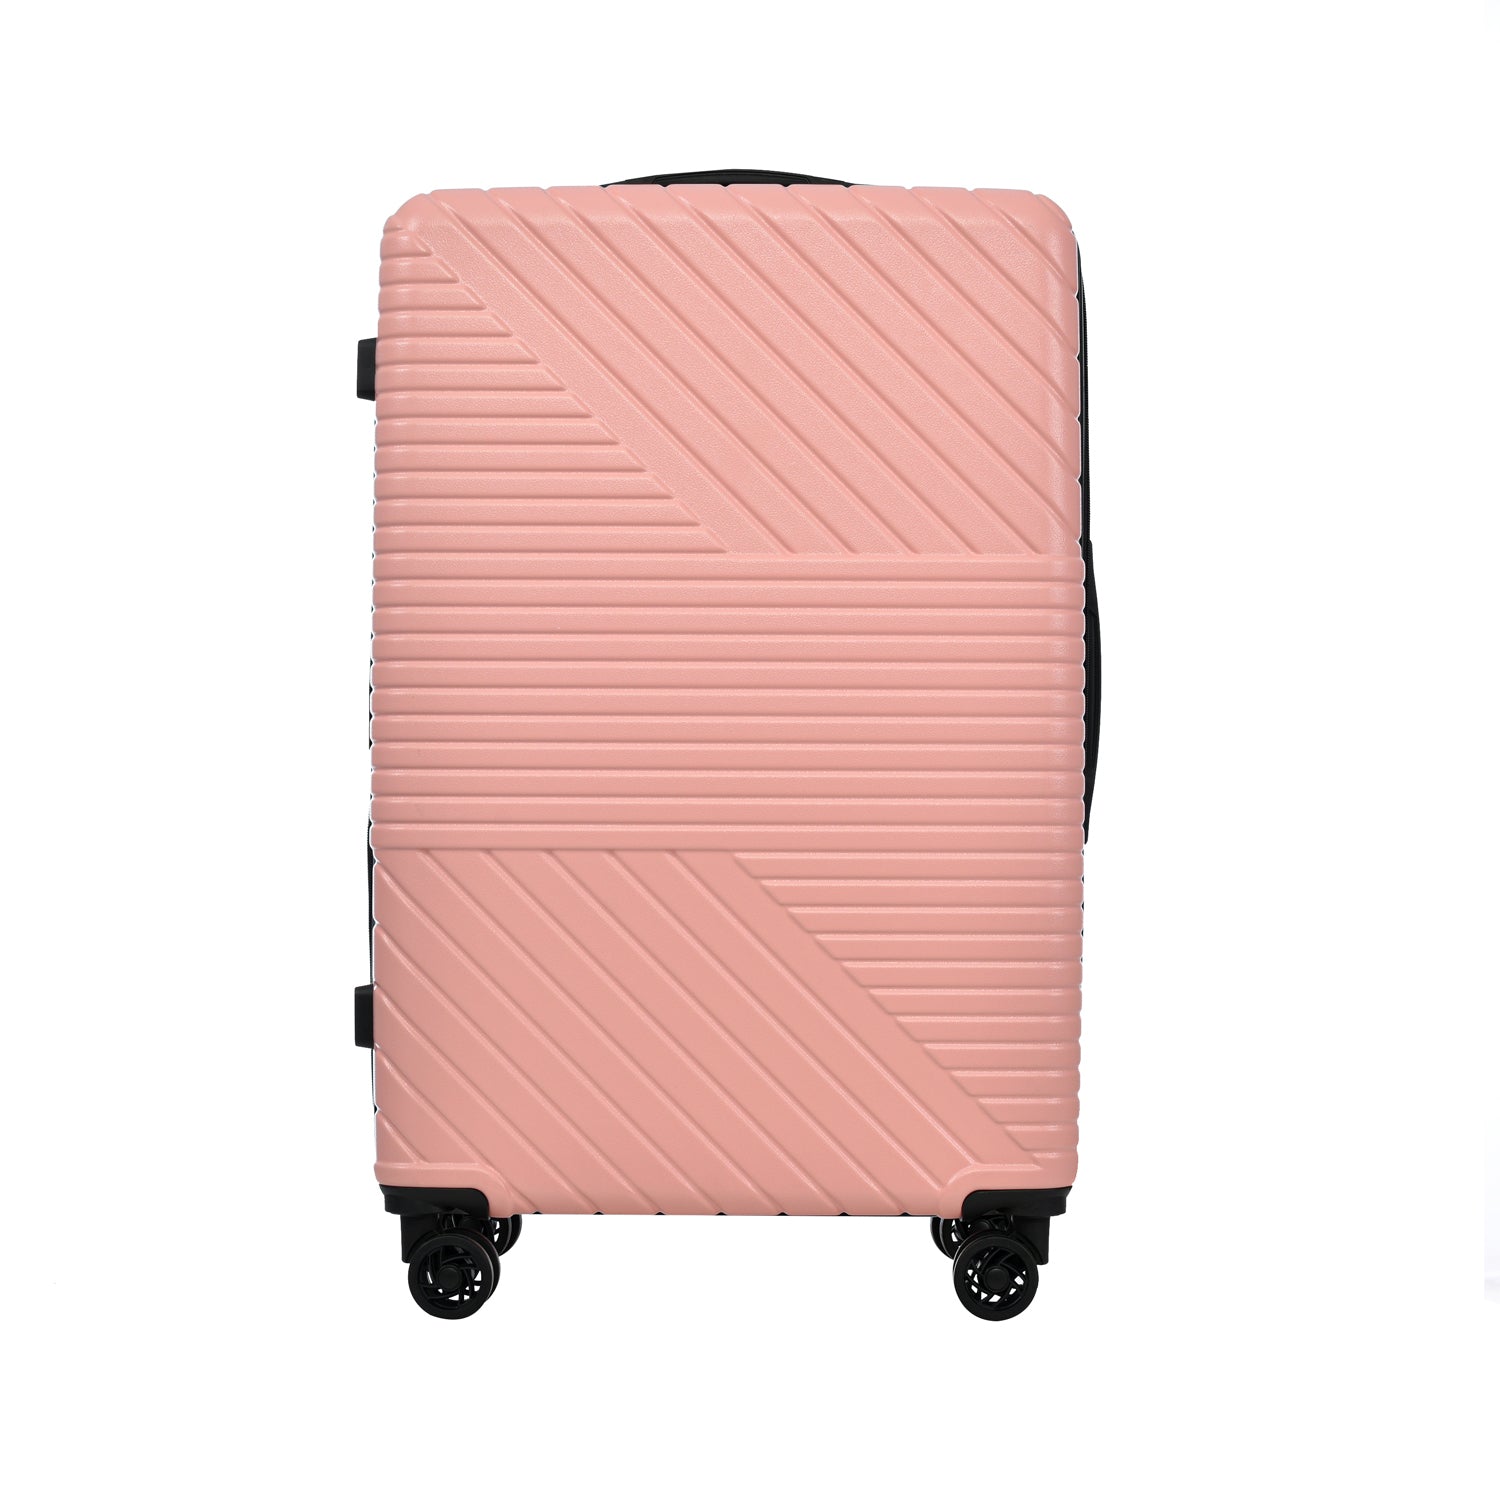 Hardshell Luggage Sets 3 Piece double spinner 8 wheels pink-abs